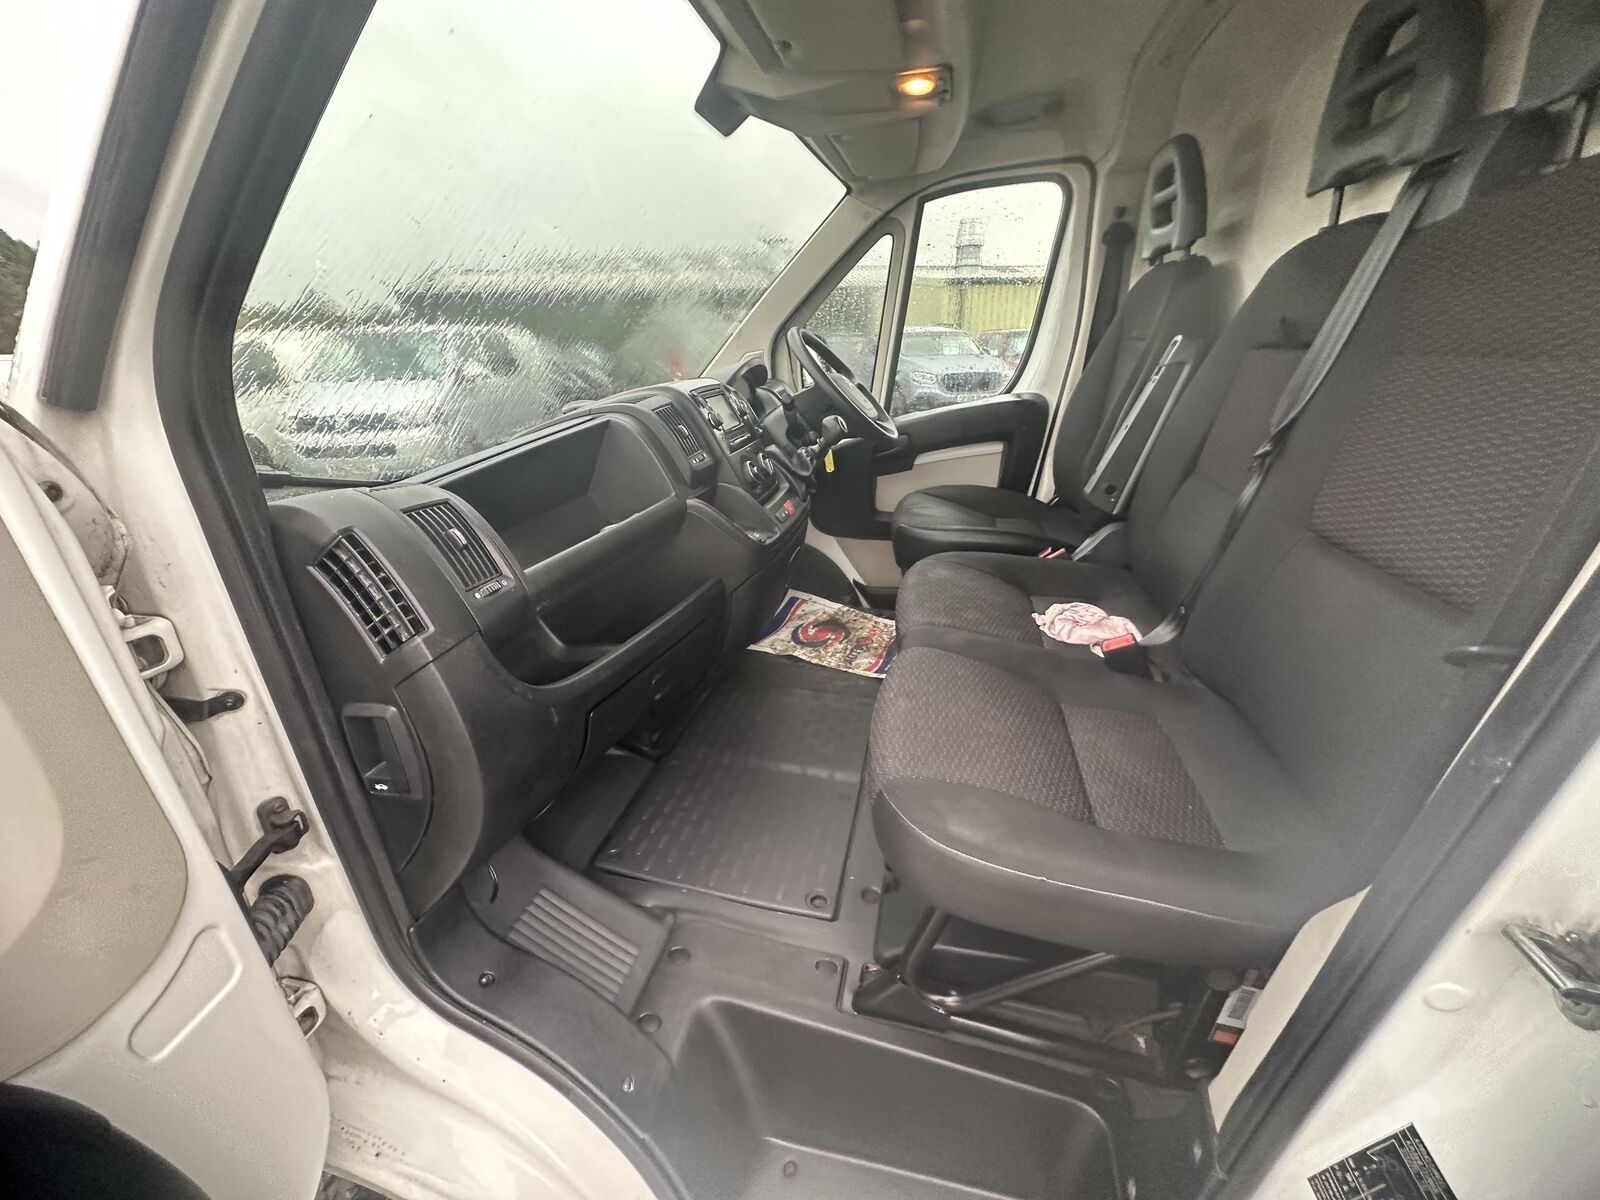 Bid on WHITE PANEL VAN MYSTERY: CITROEN RELAY 66 PLATE - - NO VAT ON HAMMER- Buy &amp; Sell on Auction with EAMA Group